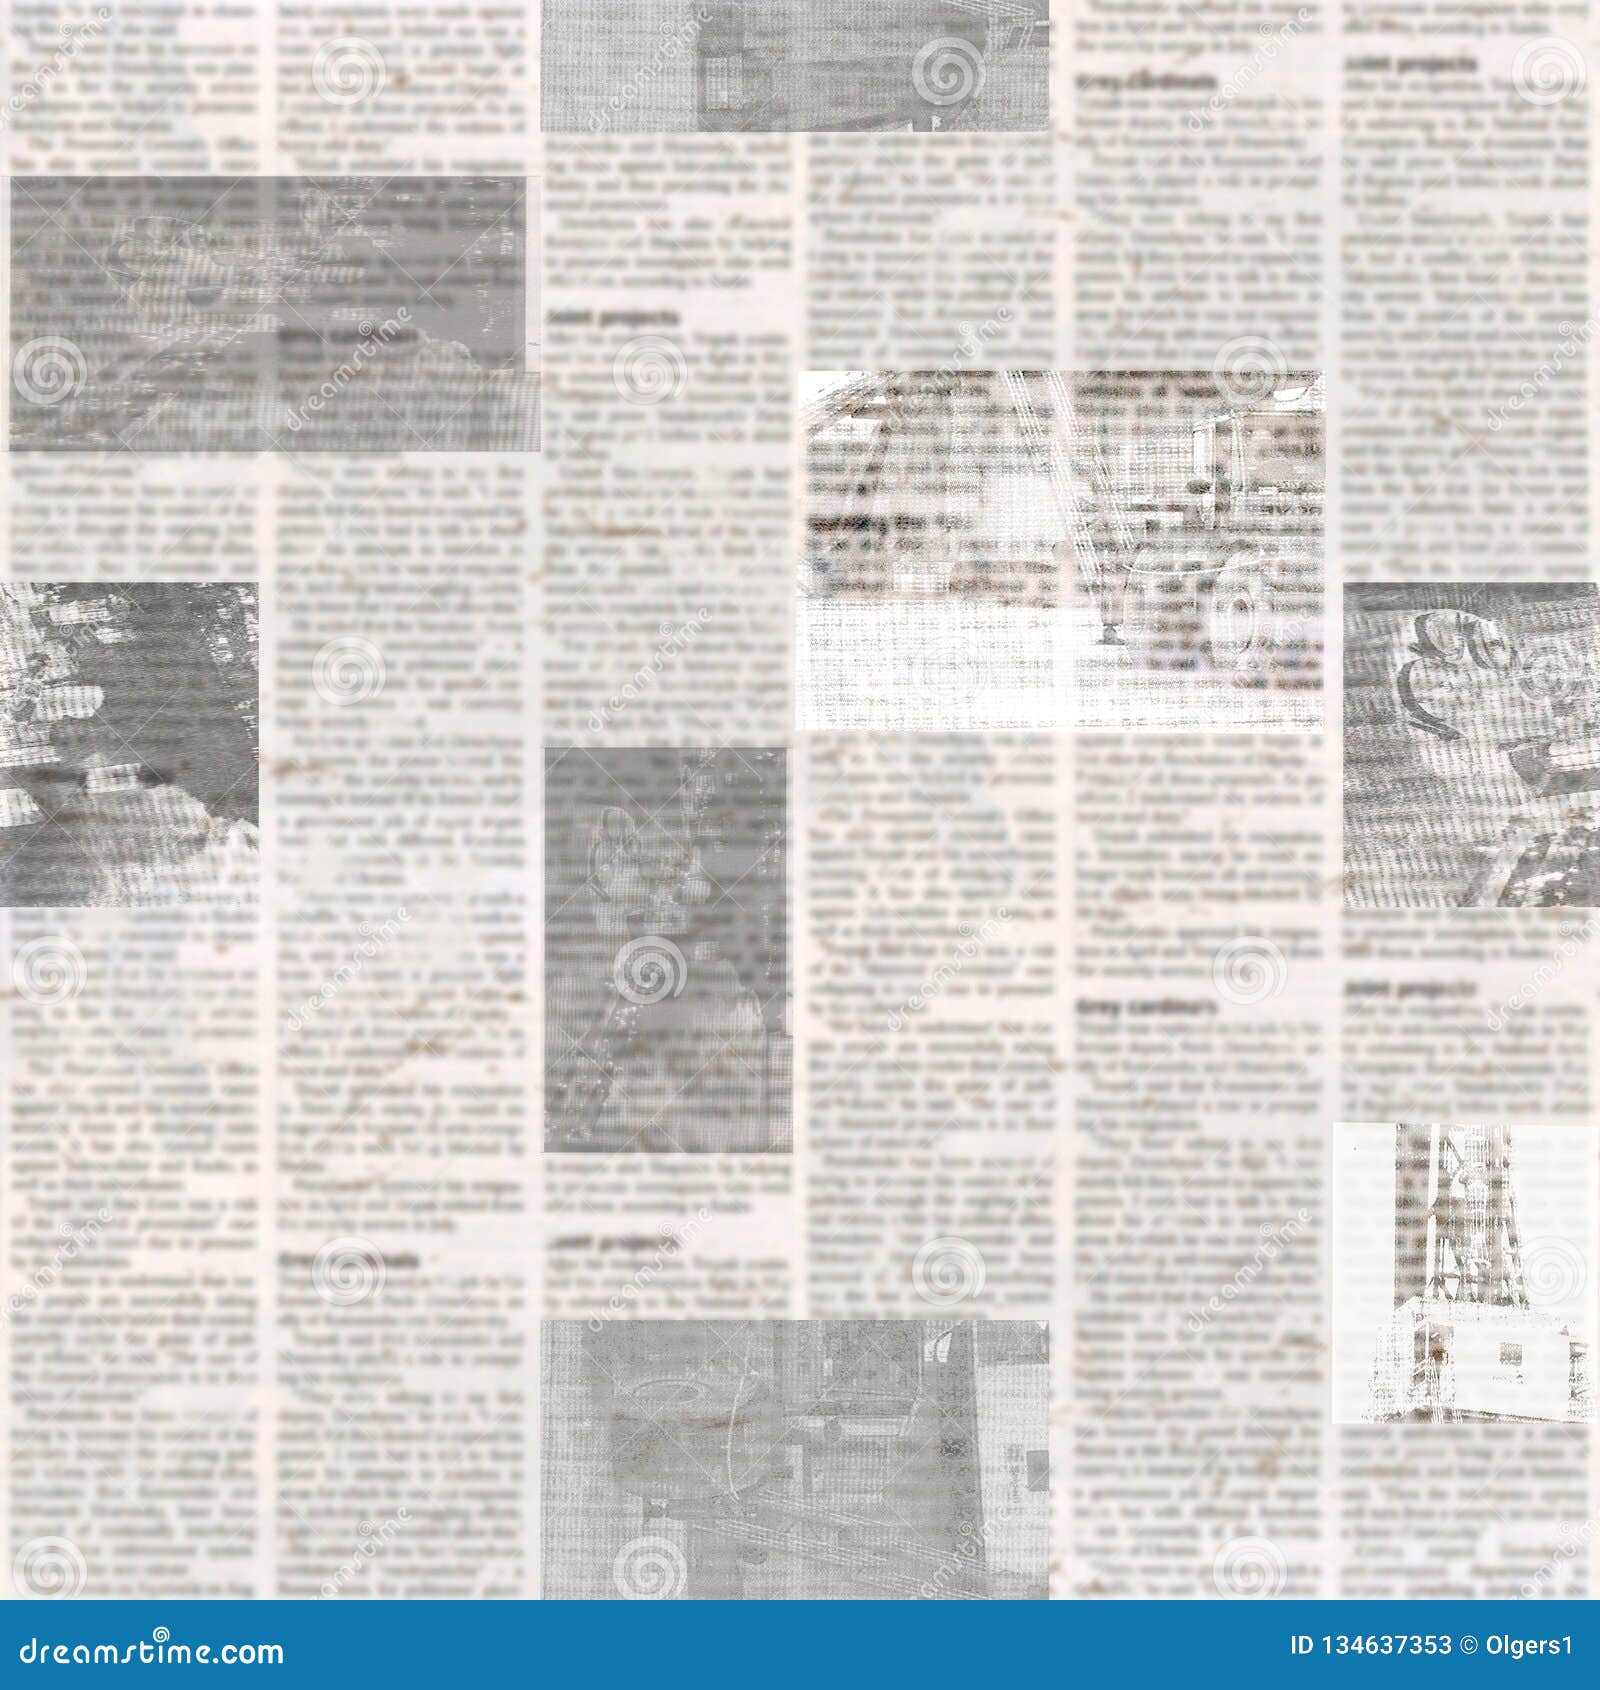 Newspaper Seamless Pattern With Old Vintage Unreadable Paper Texture Background Stock Image Image Of Board Black